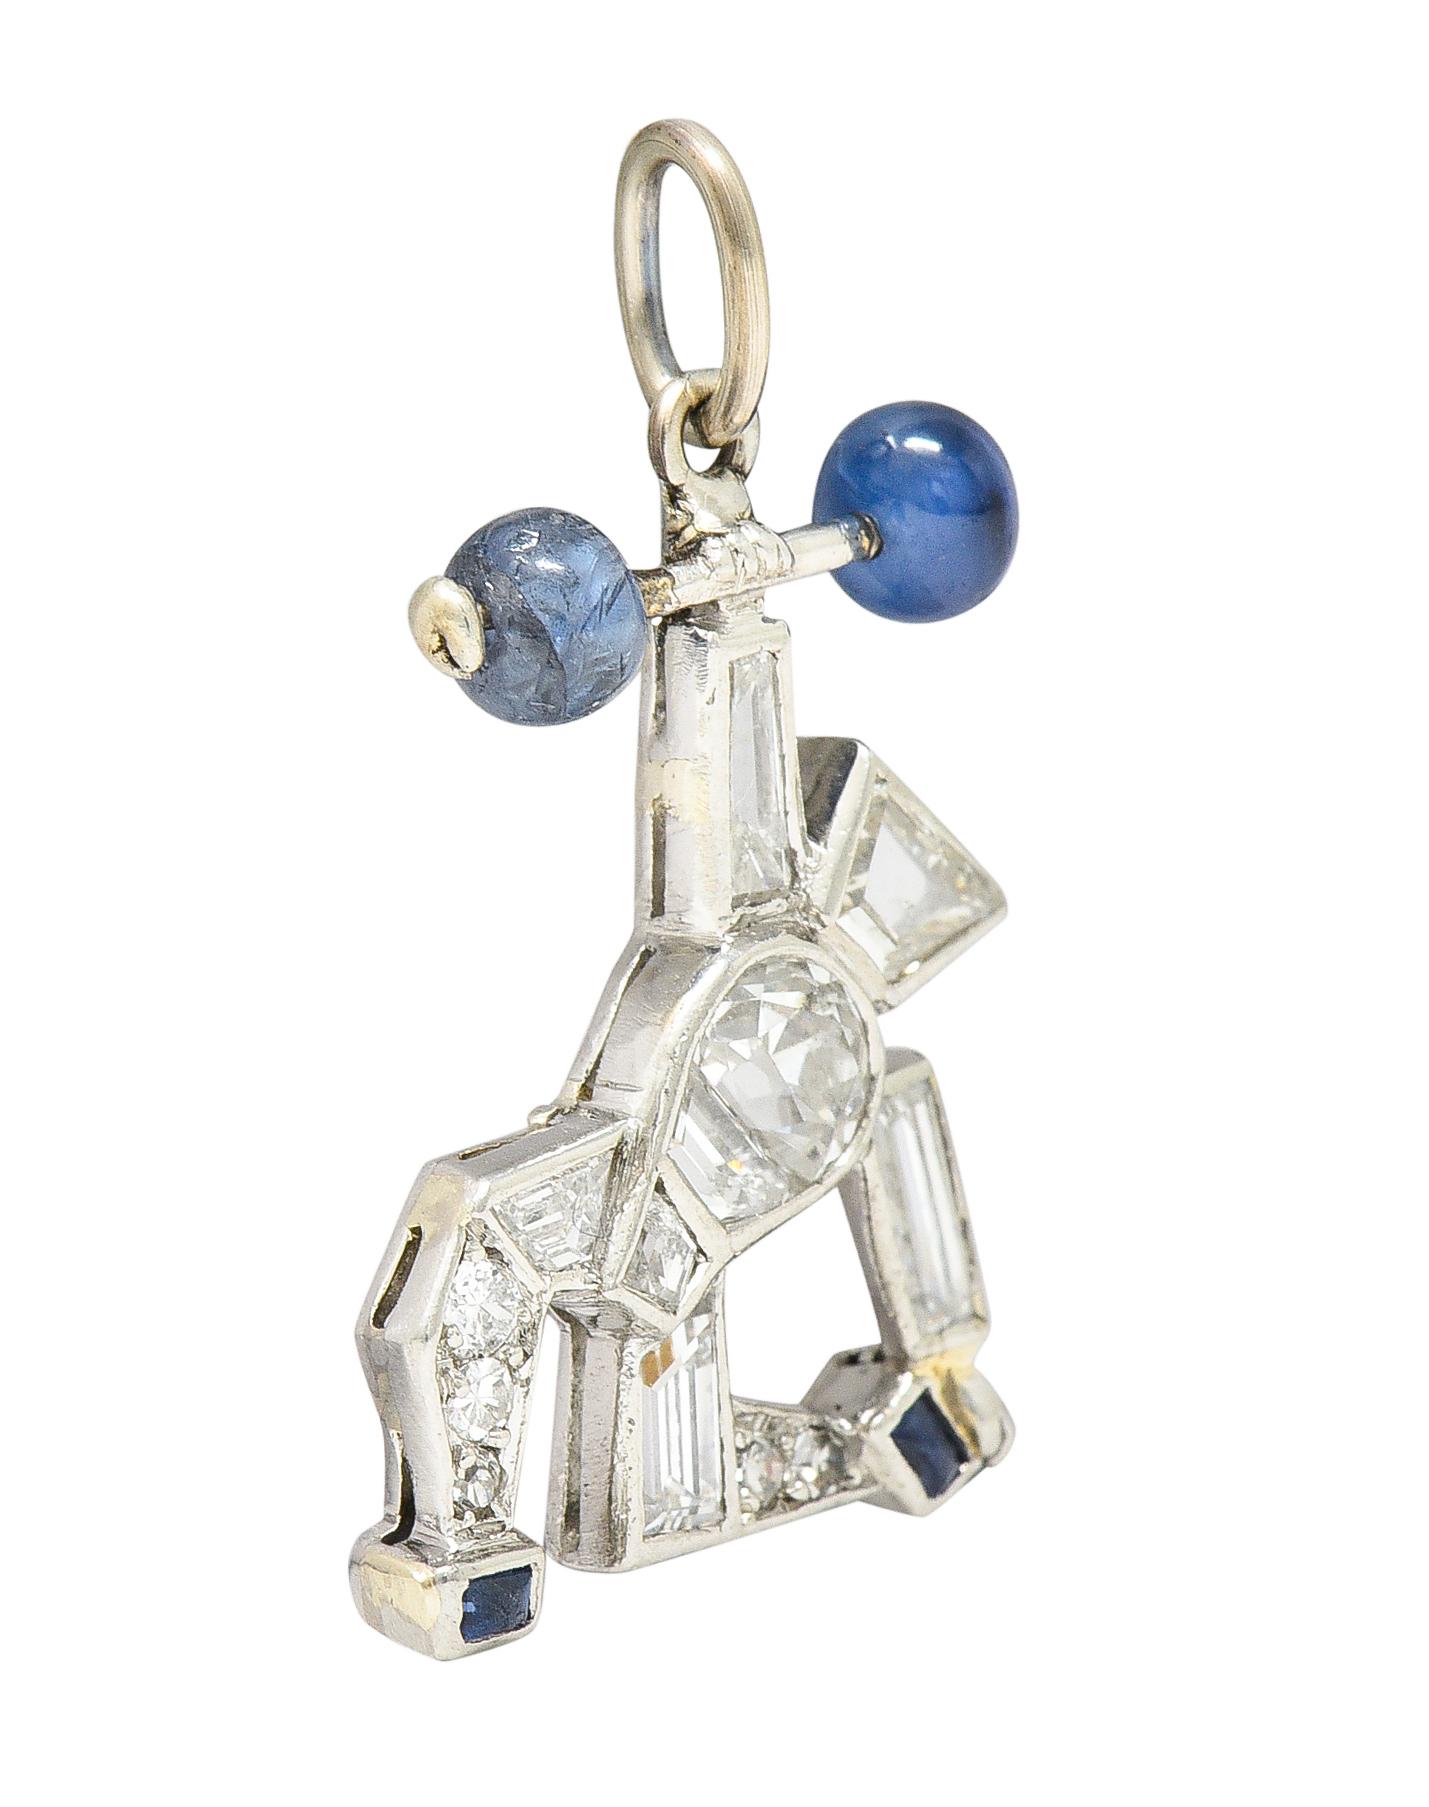 Designed as a geometrically styled strongman motif. Down on one knee and hoisting barbell overhead. Calibré cut sapphire shoes with barbell terminals as riveted sapphire beads. Royal blue in color while weighing collectively approximately 1.00